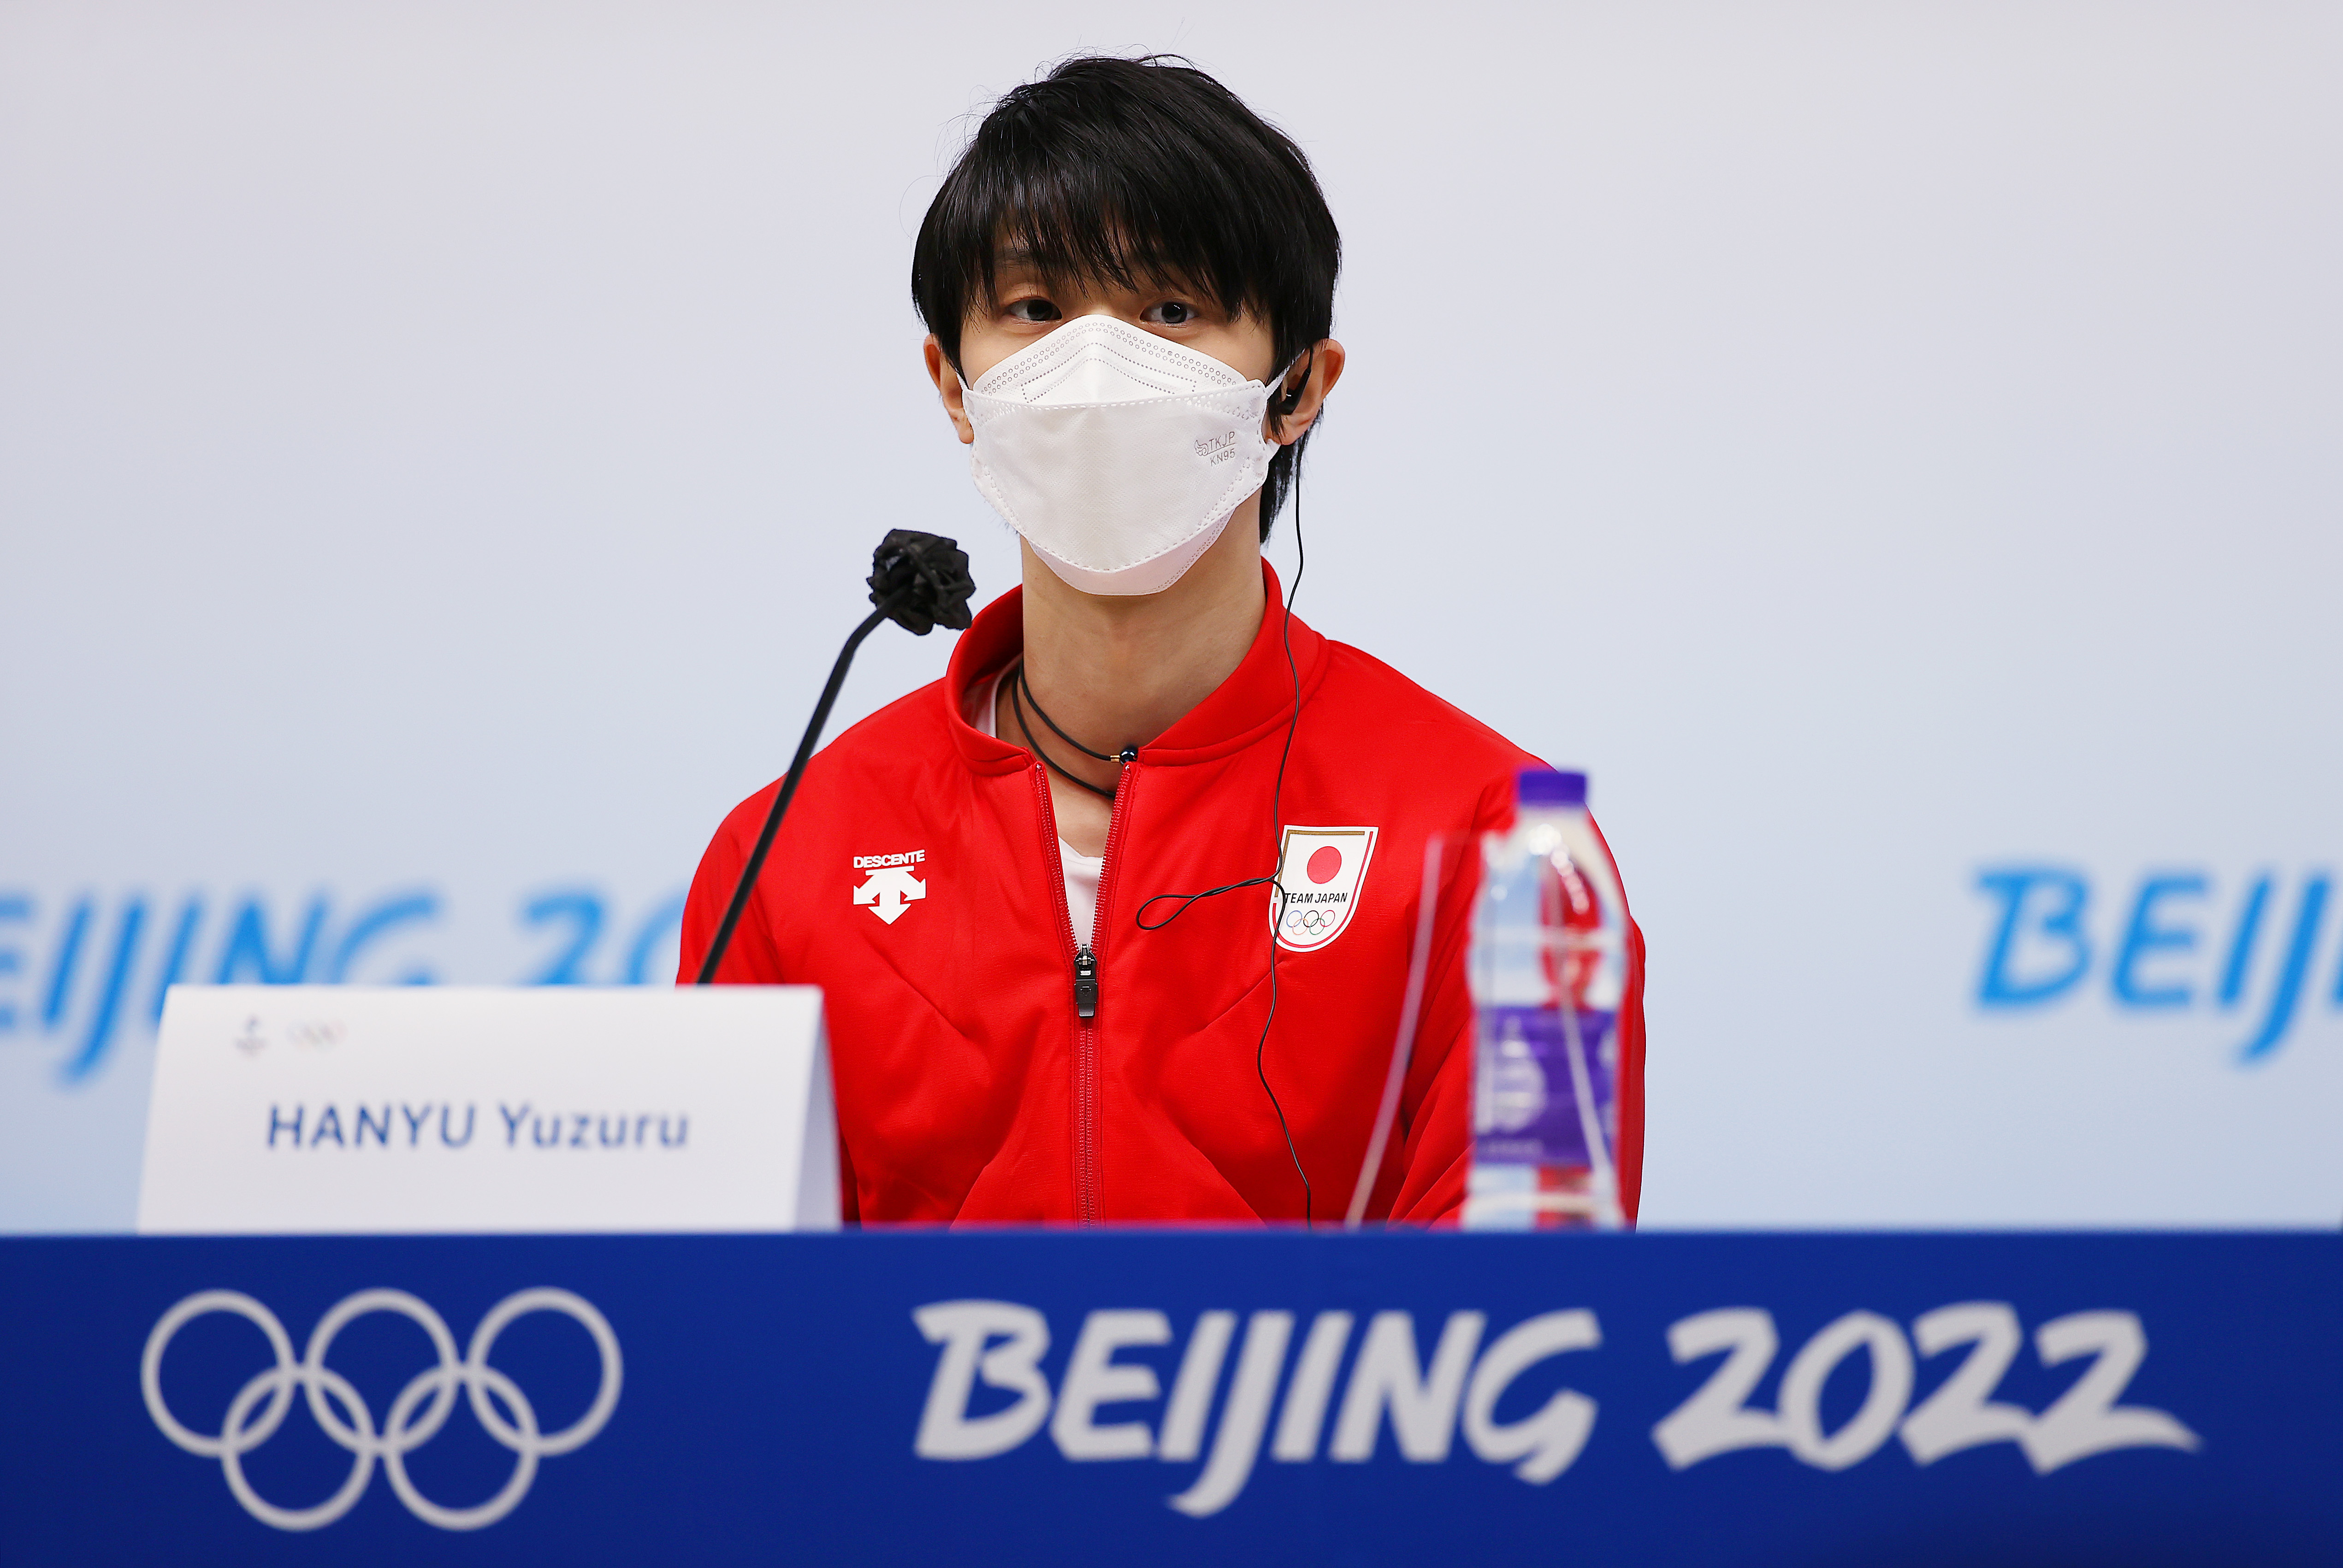 Japan's Yuzuru Hanyu speaks to the media during a figure skating press conference on February 14.